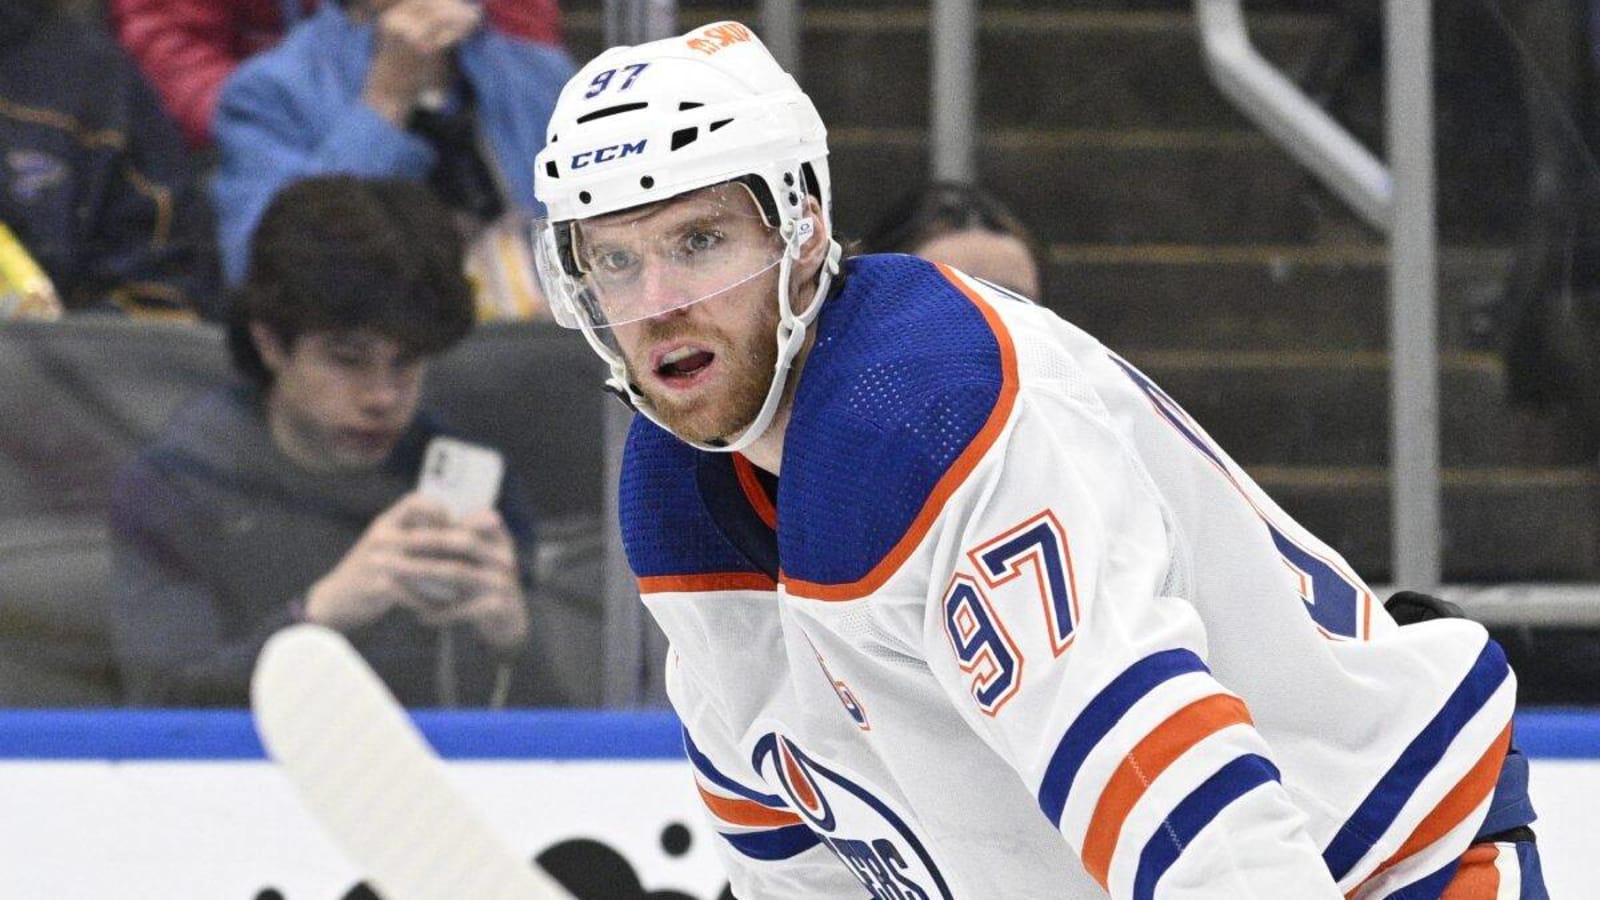 Edmonton Oilers captain Connor McDavid will not play Friday, remains questionable for Saturday with lower-body injury